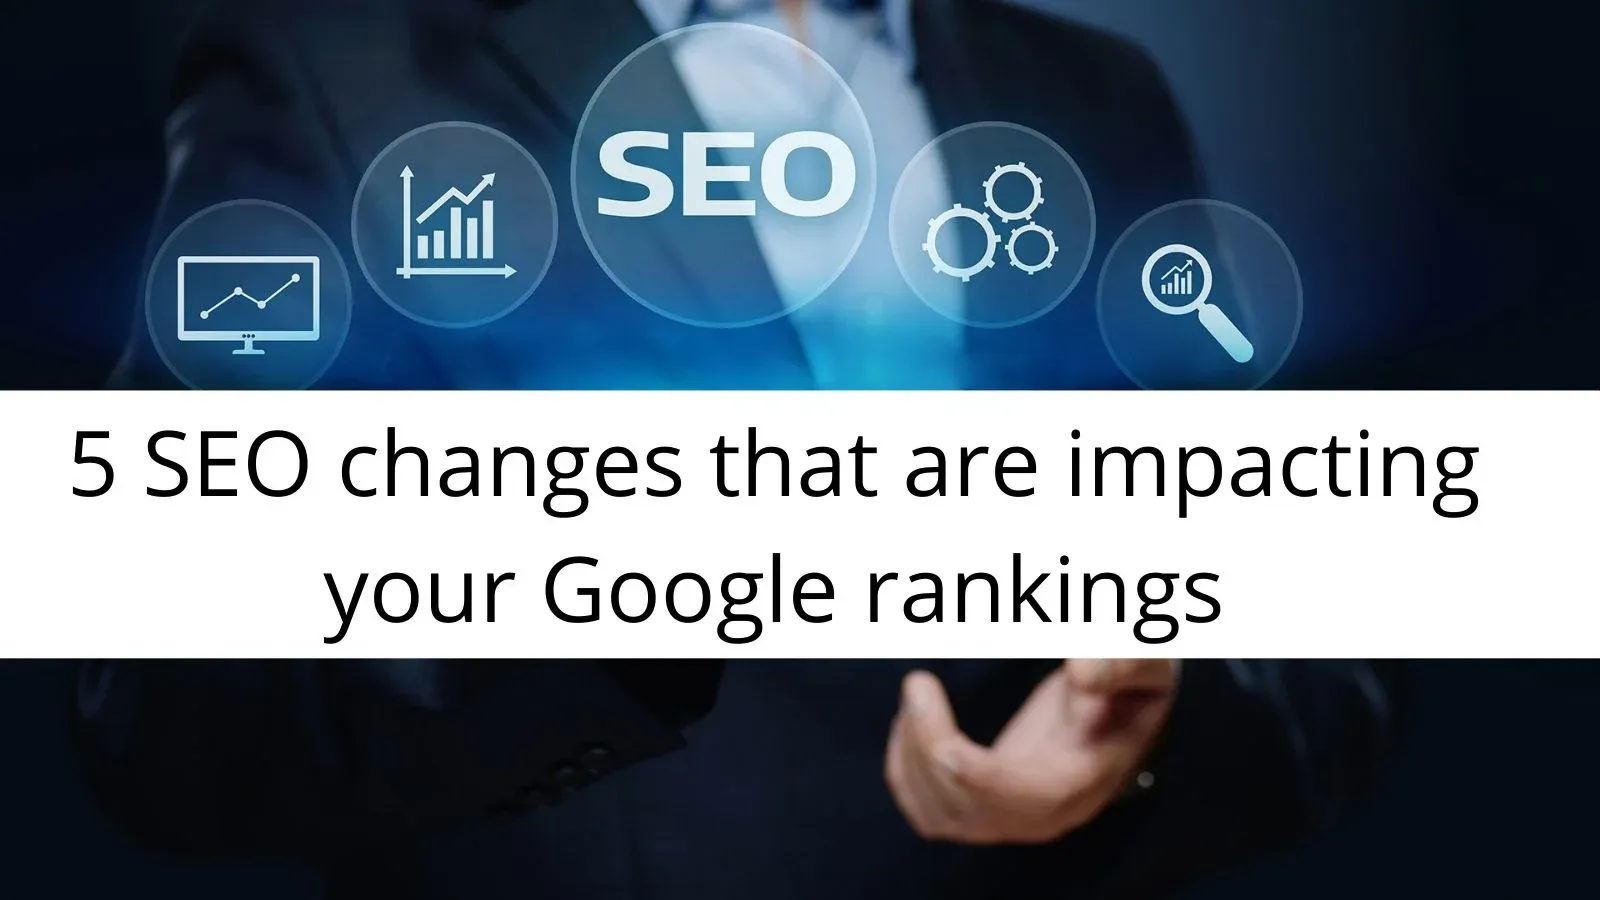 5 SEO changes that are impacting your Google rankings